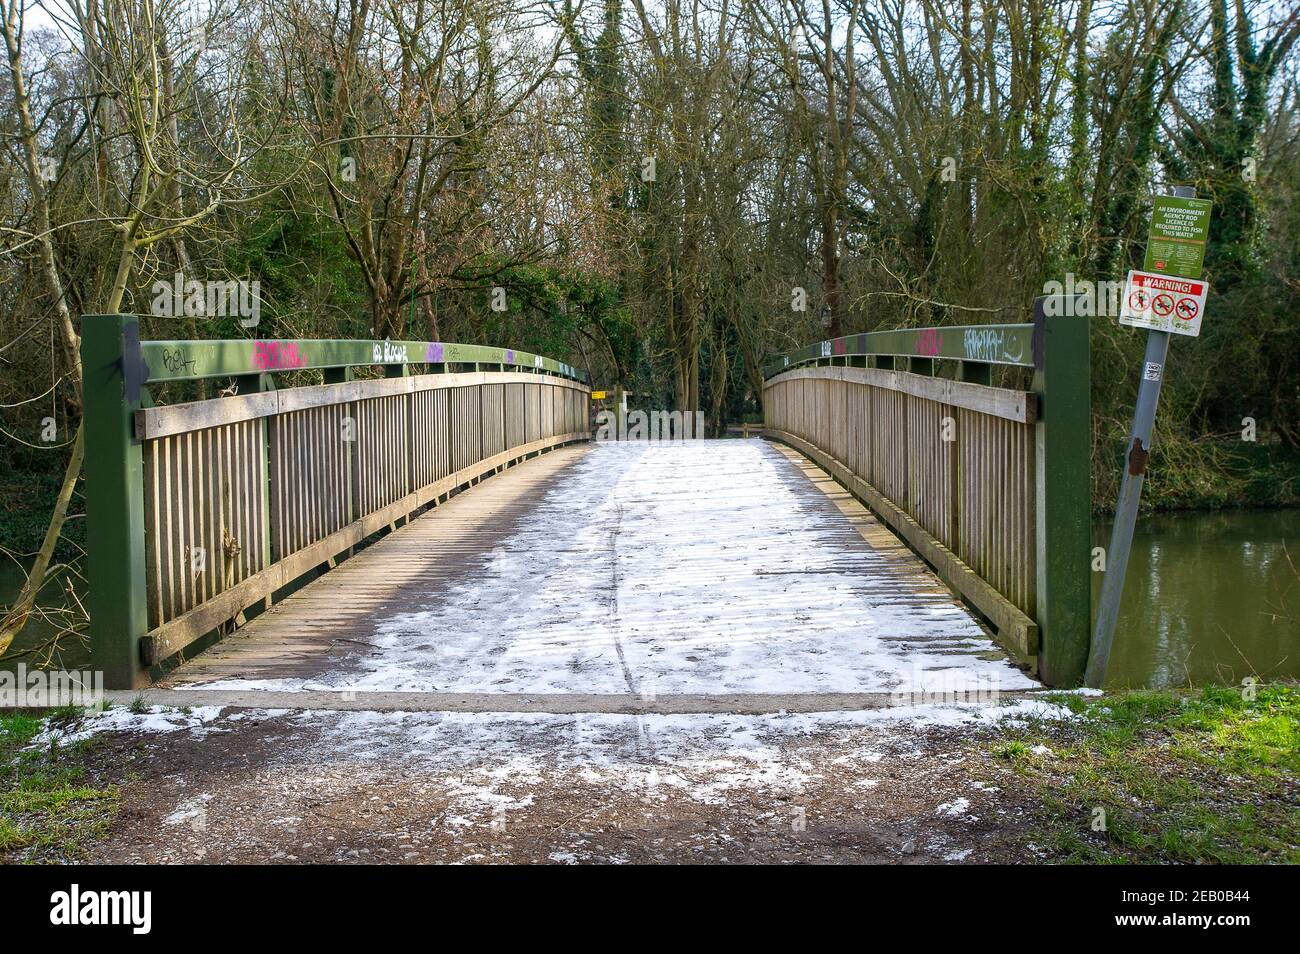 Denham, Buckinghamshire, UK. 11th February, 2021. Snow still sits on a bridge across the River Colne. Following recent heavy rainfall the River Colne in Denham Country Park has burst its banks. Due to sustained freezing temperatures, both patches of snow and flooding remain in parts of the park. Credit: Maureen McLean/Alamy Live News Stock Photo